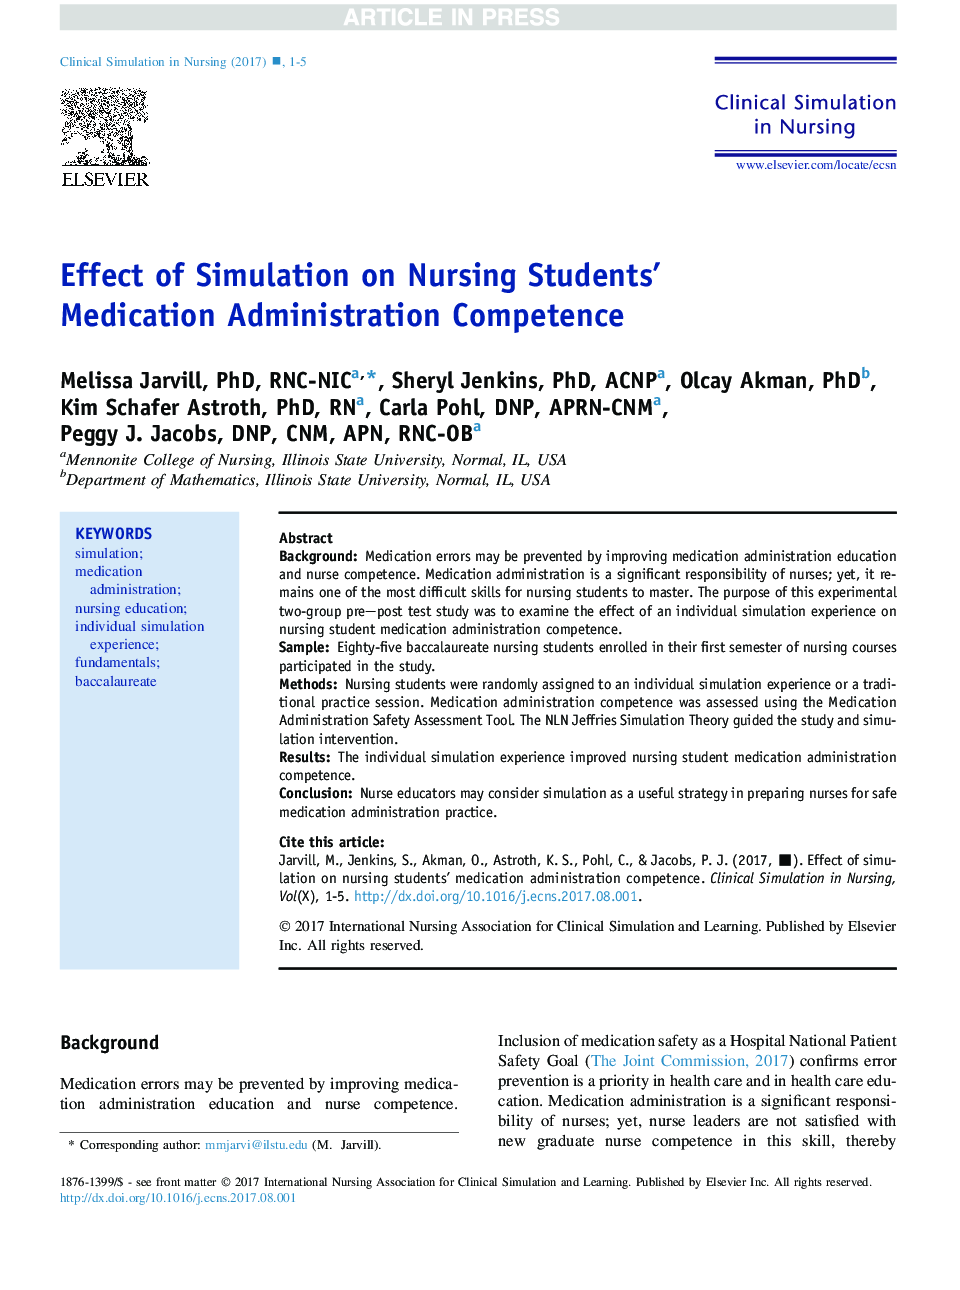 Effect of Simulation on Nursing Students' Medication Administration Competence